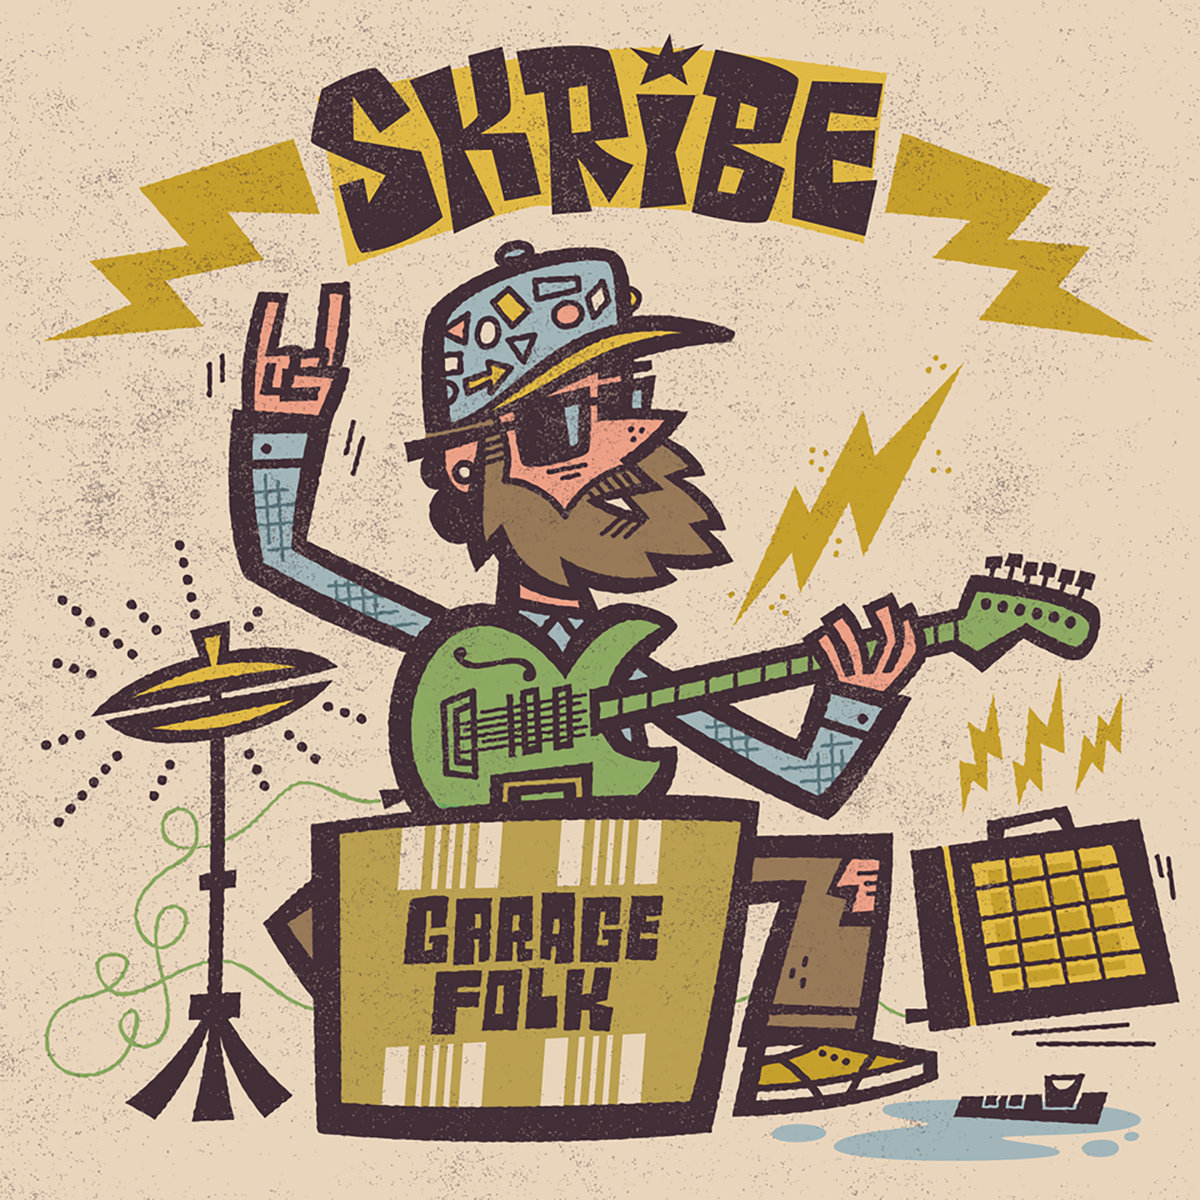 “Garage Folk” features seven tracks on cassette, which Skribe hopes will become a collector’s item.